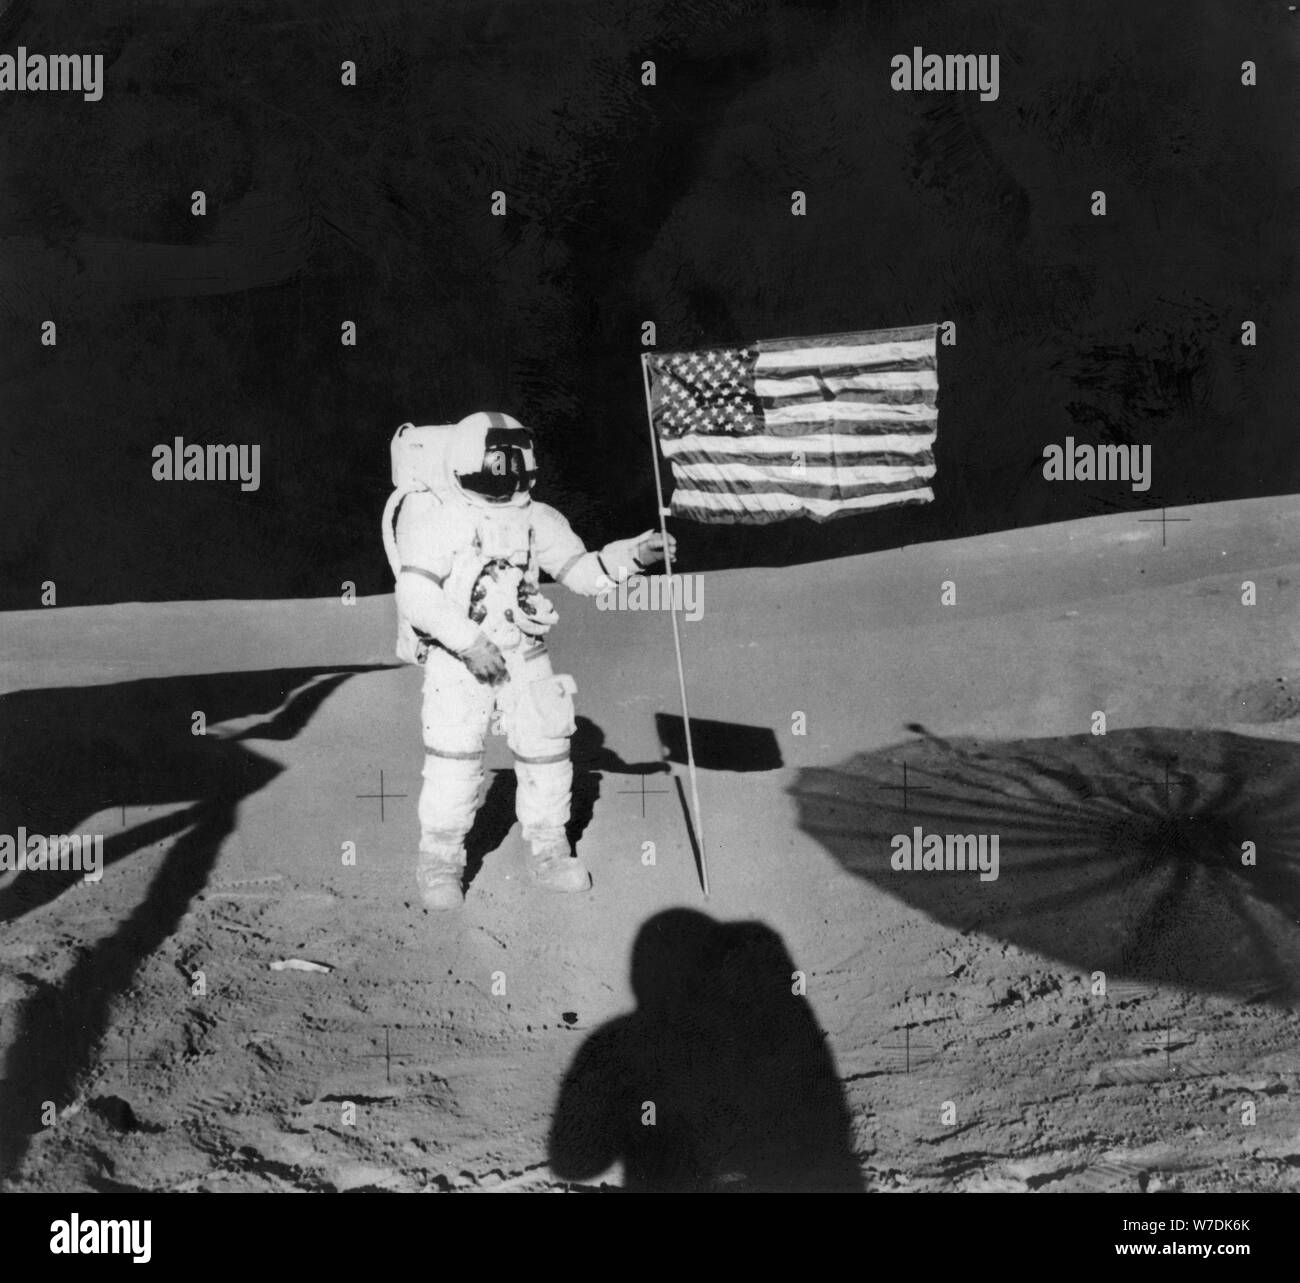 Alan Shepard (1923-1998) planting an American flag during the Apollo 14 mission, 1971. Artist: Unknown Stock Photo